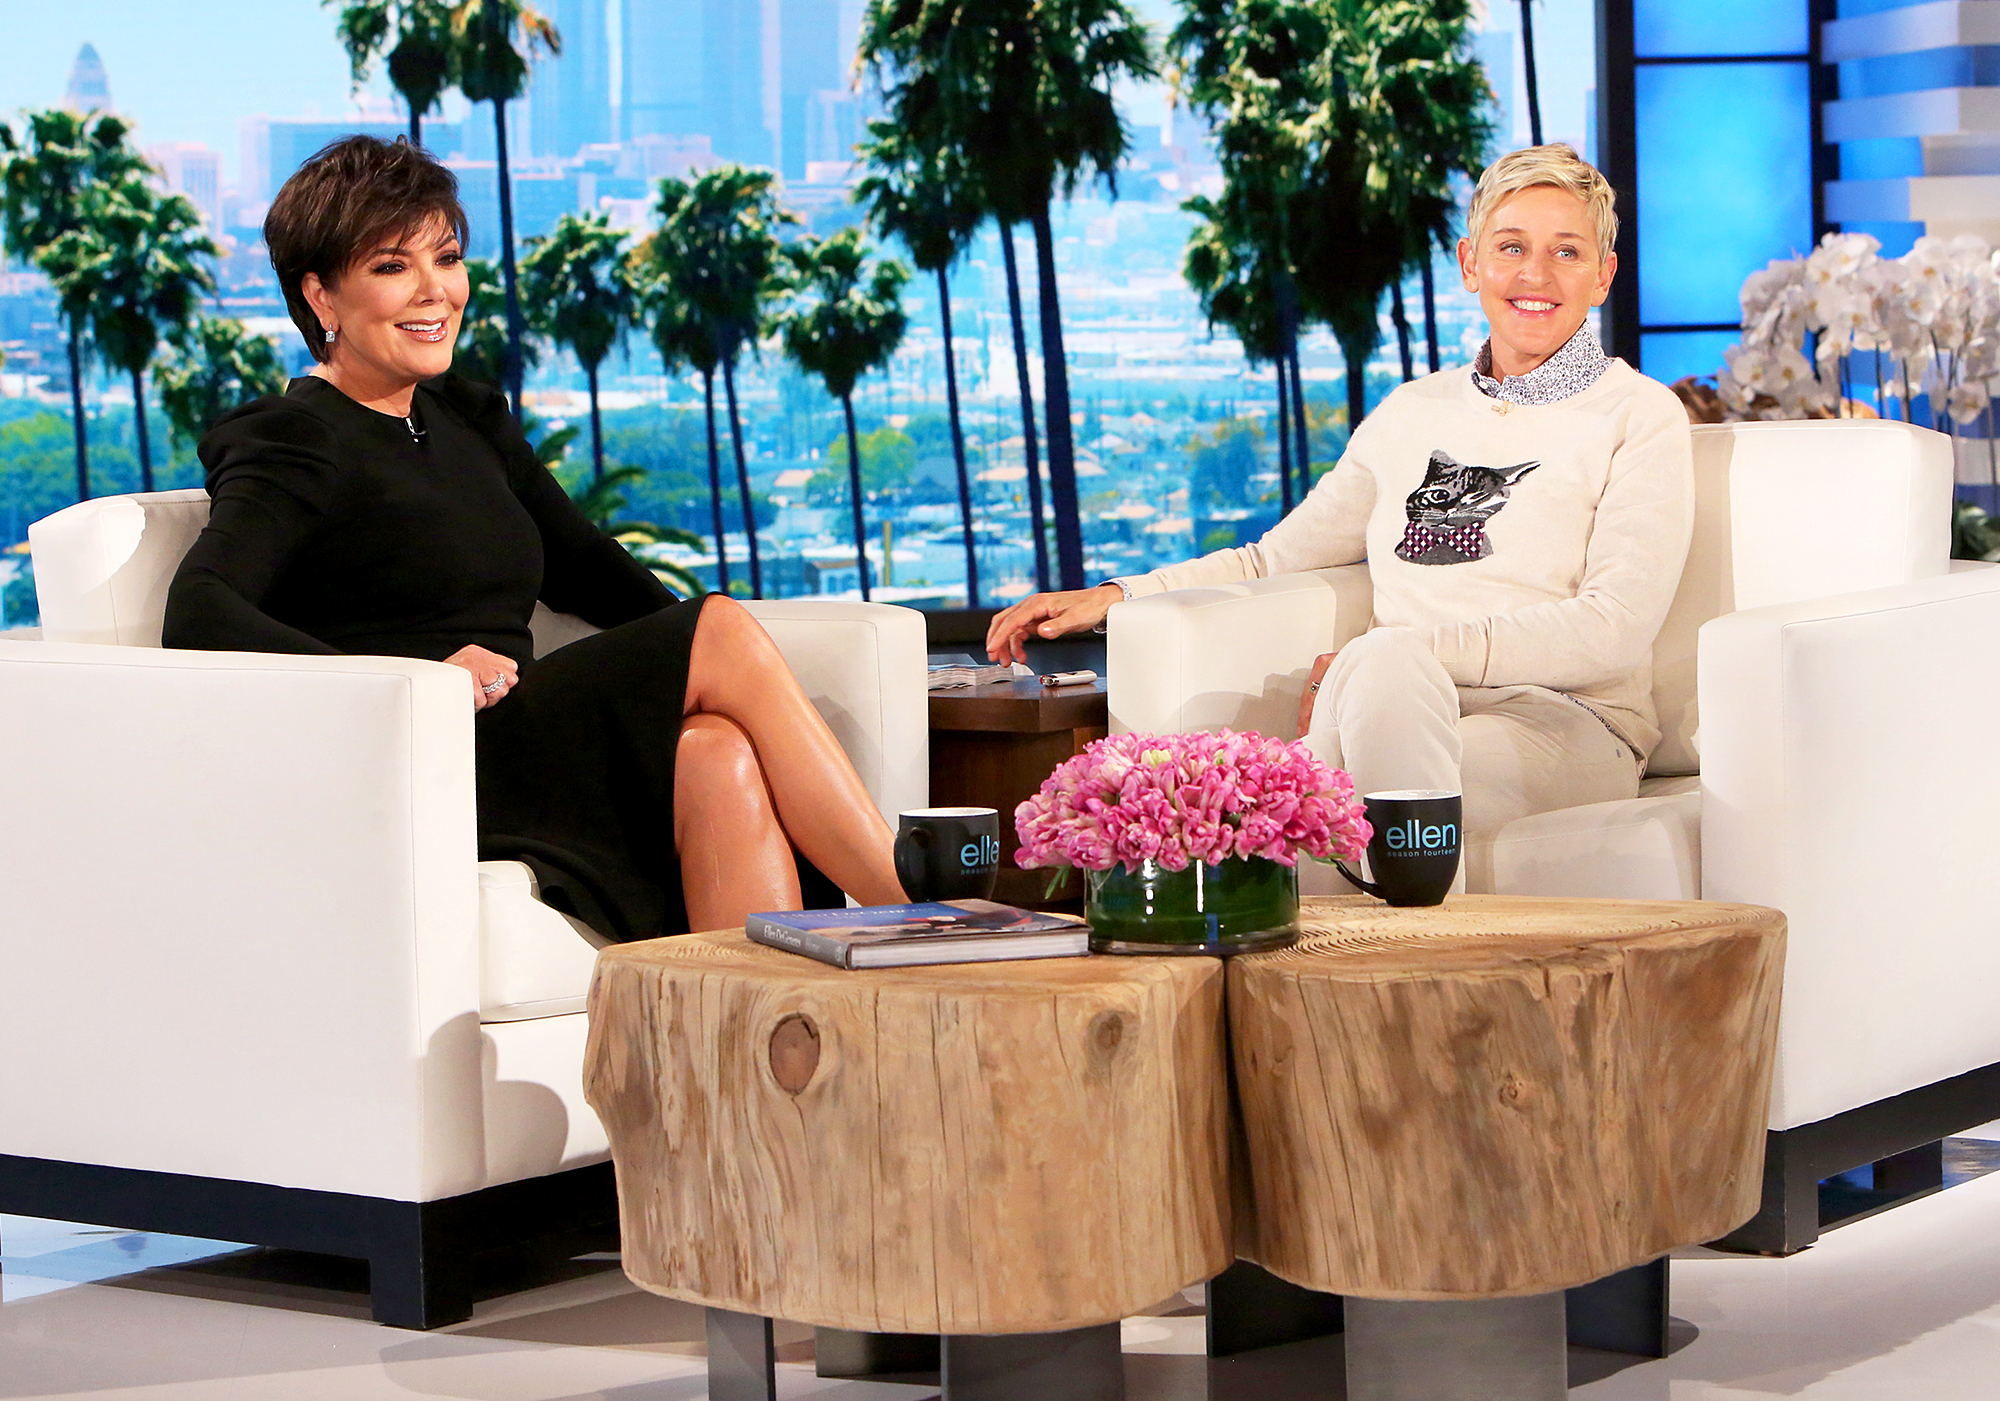 Kris Jenner on Whether She'd Marry Corey Gamble